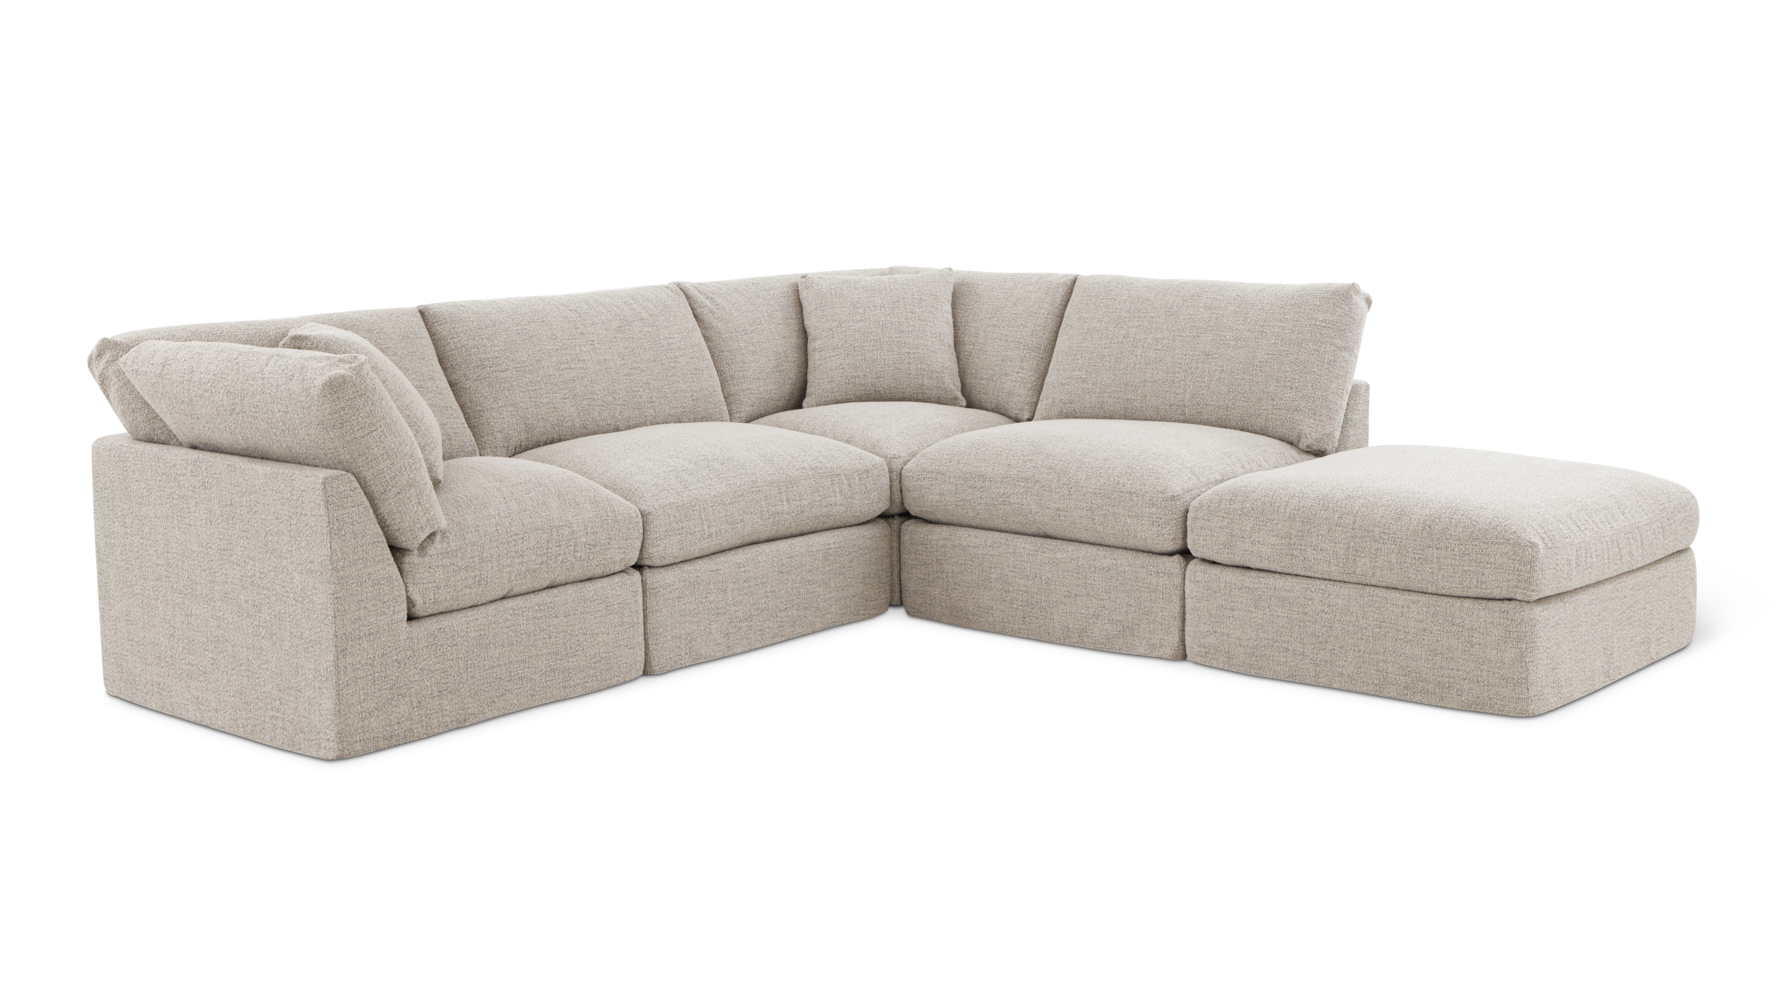 Get Together™ 5-Piece Modular Sectional, Standard, Oatmeal - Image 4